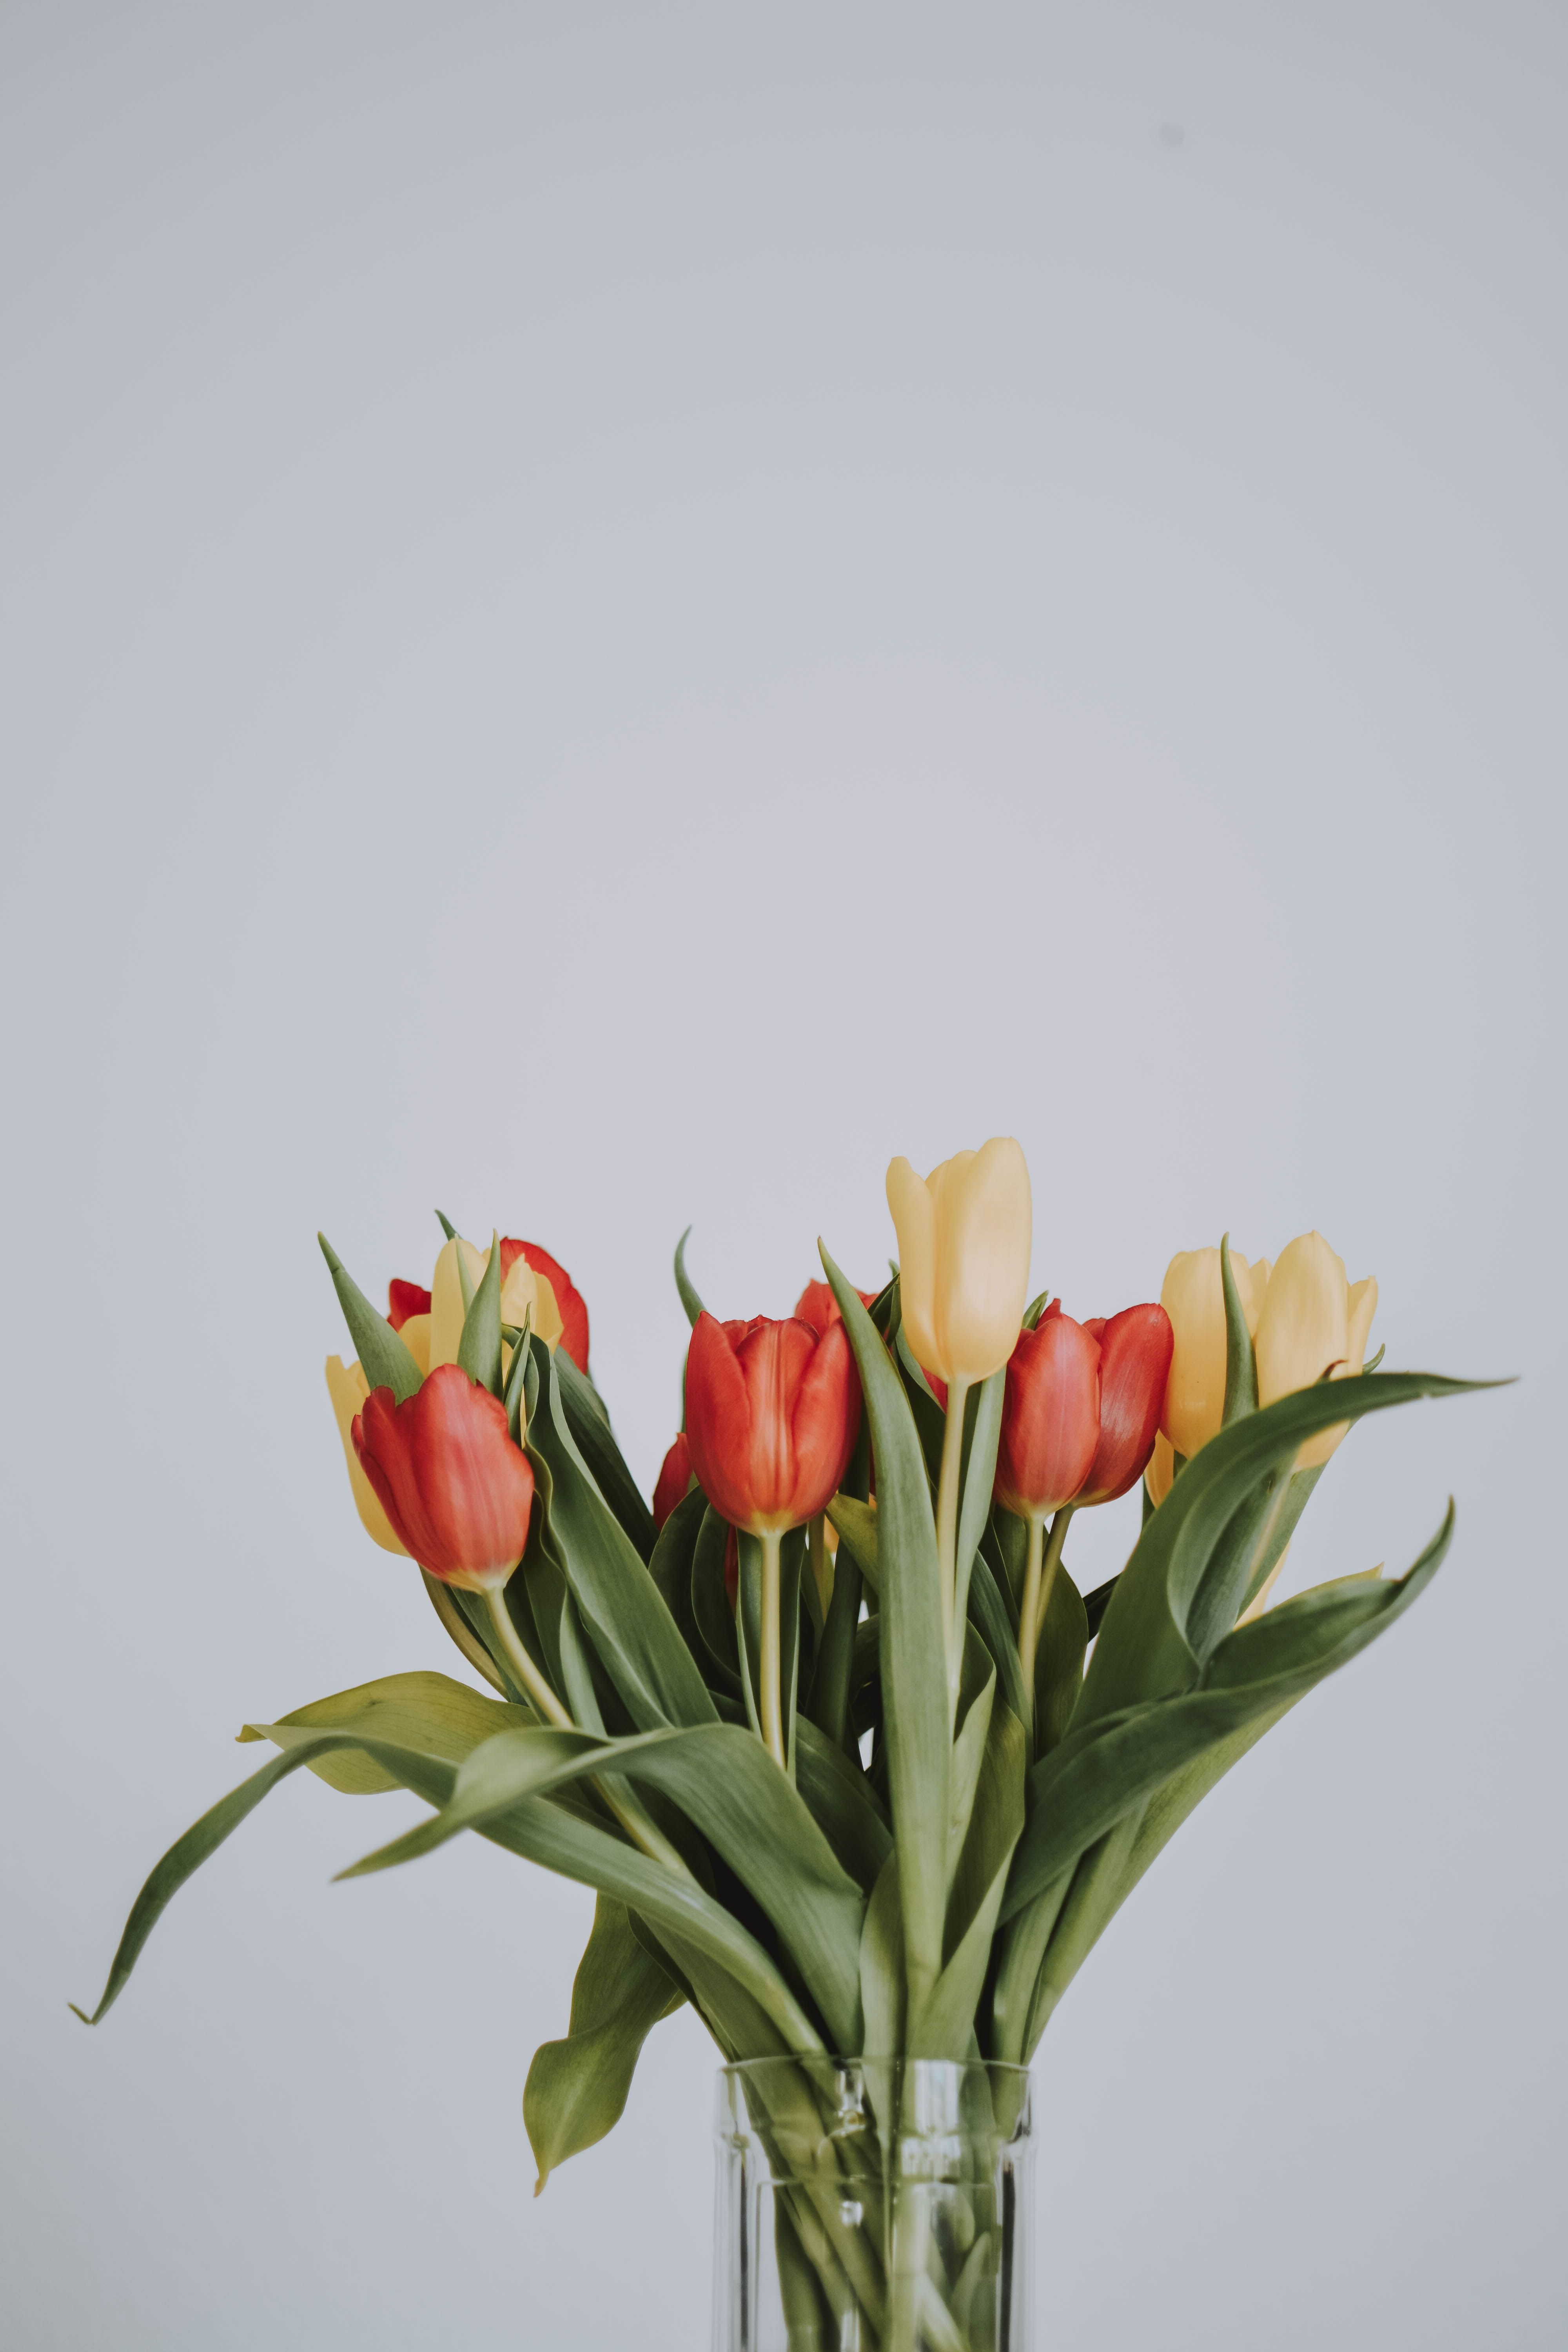 A vase of flowers sitting on top table - Tulip